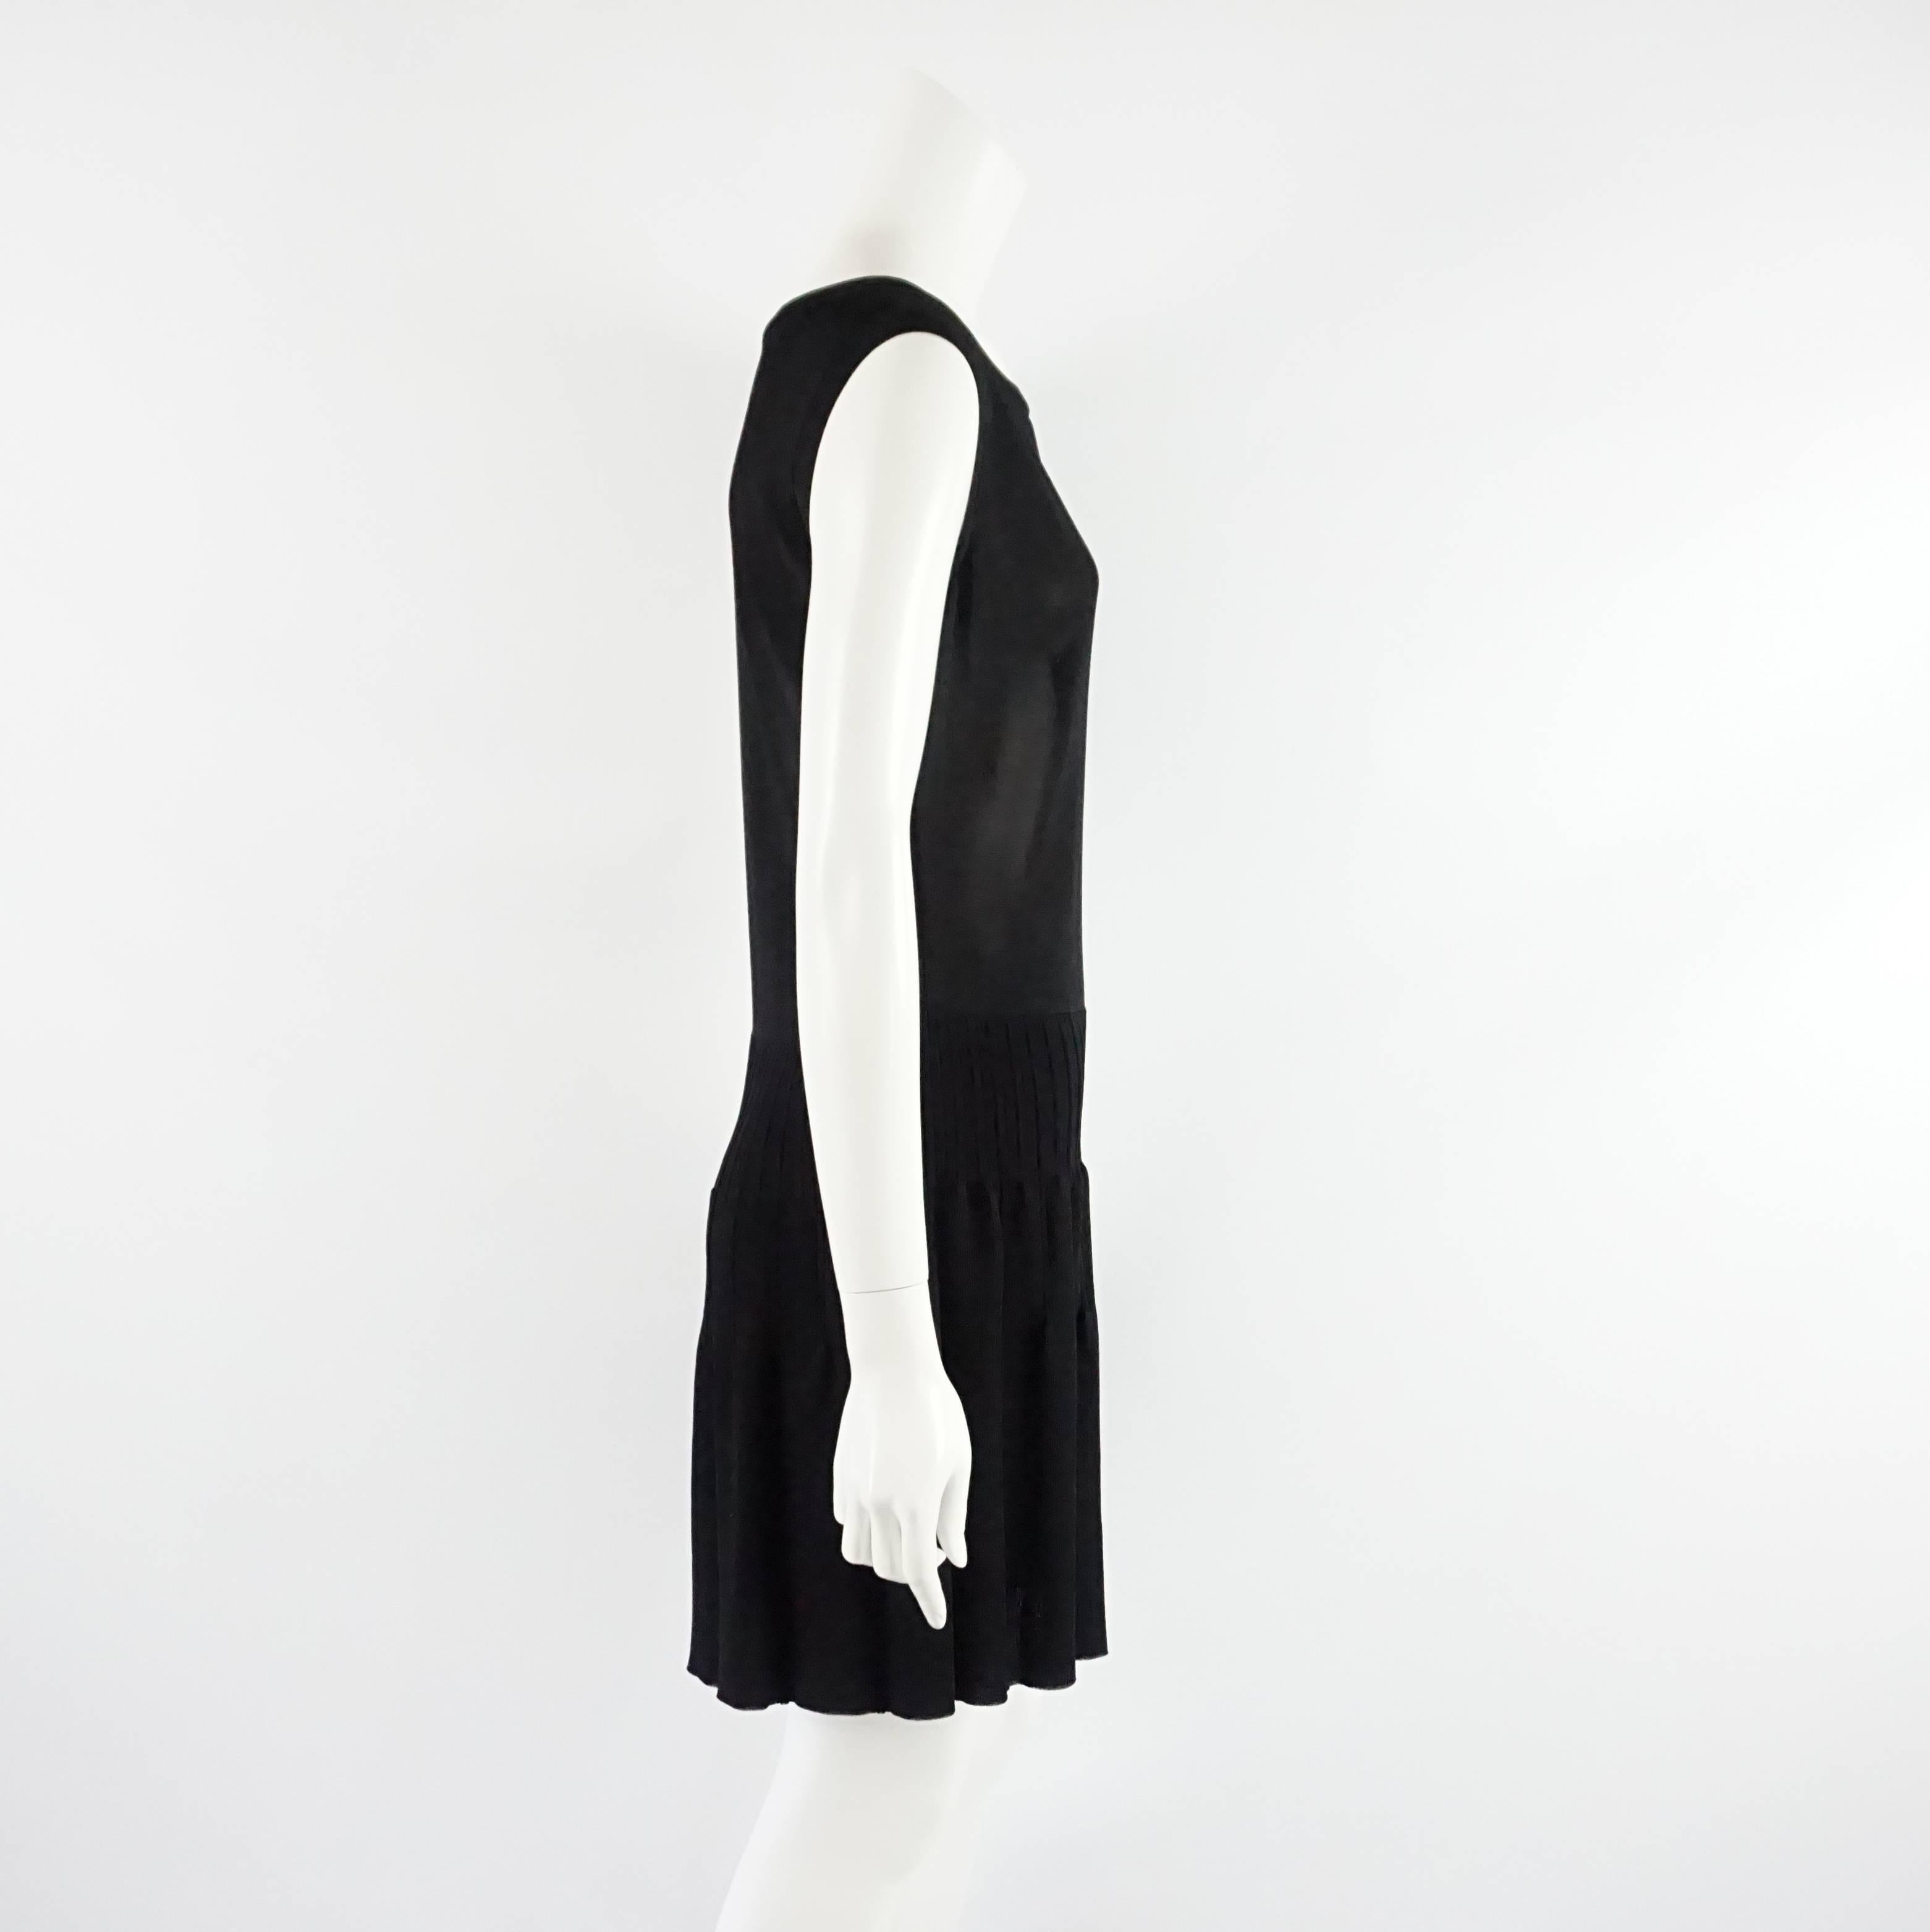 This black Chanel sleeveless knit dress features a slightly sheer top and a black pleated skirt. The top has a Chanel logo detail. This dress is in excellent condition.

Measurements
Shoulder to Shoulder: 16.5"
Bust: 35"
Waist: